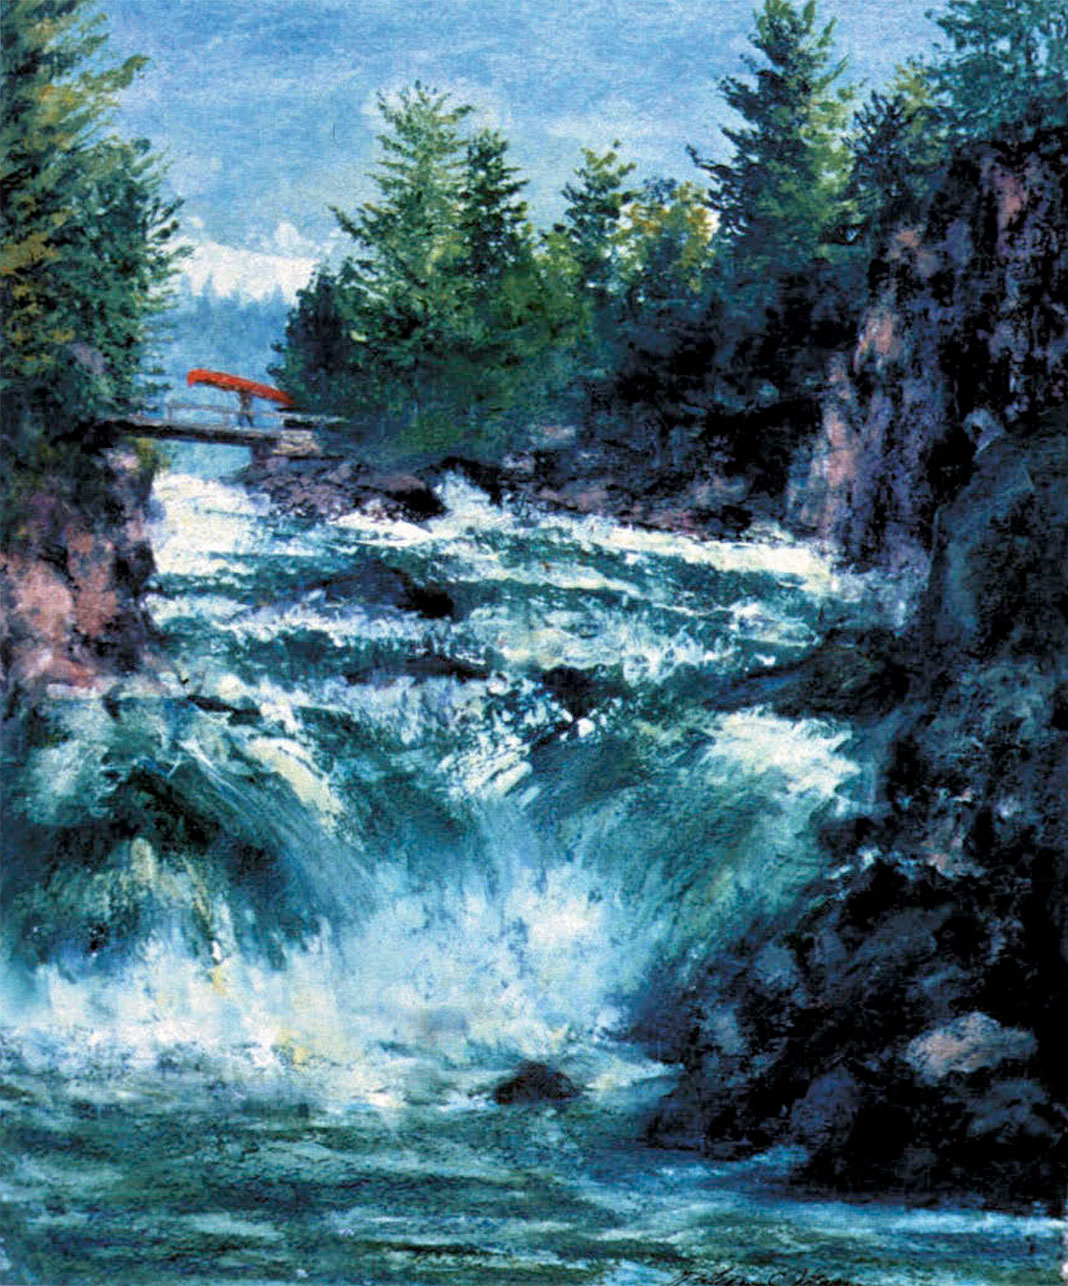 Bill Mason painting of a waterfall with portaging canoeist